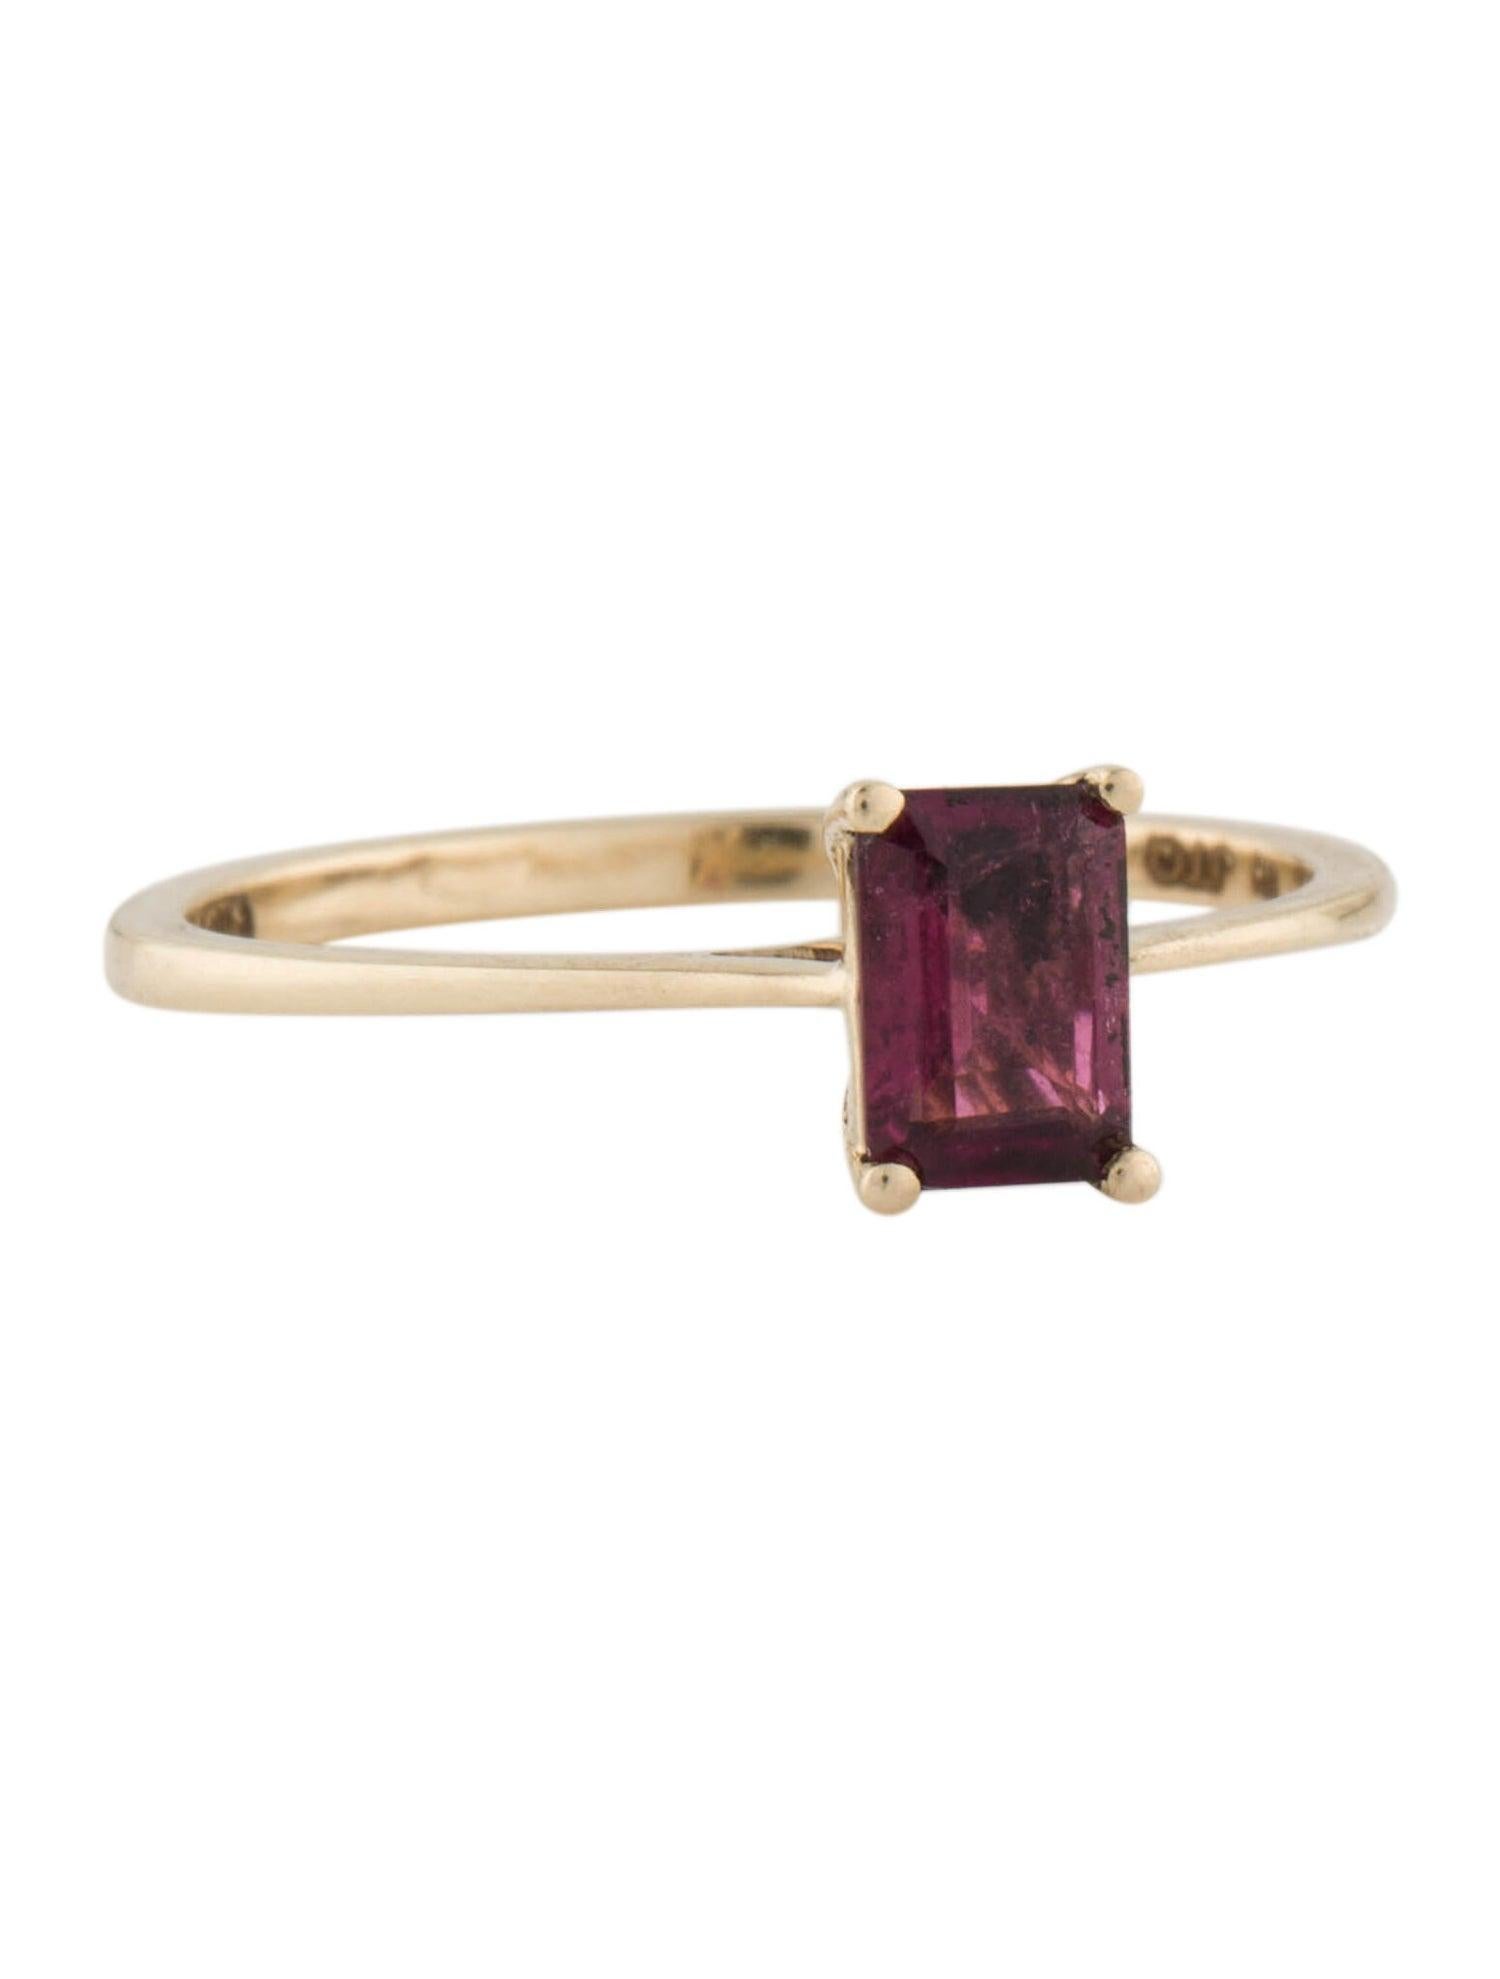 Introducing our exquisite 14K Yellow Gold Garnet Cocktail Ring, a timeless piece of fine jewelry that embodies sophistication and allure. Crafted with precision, this ring features a 0.58 carat cut cornered rectangular step cut garnet, boasting a